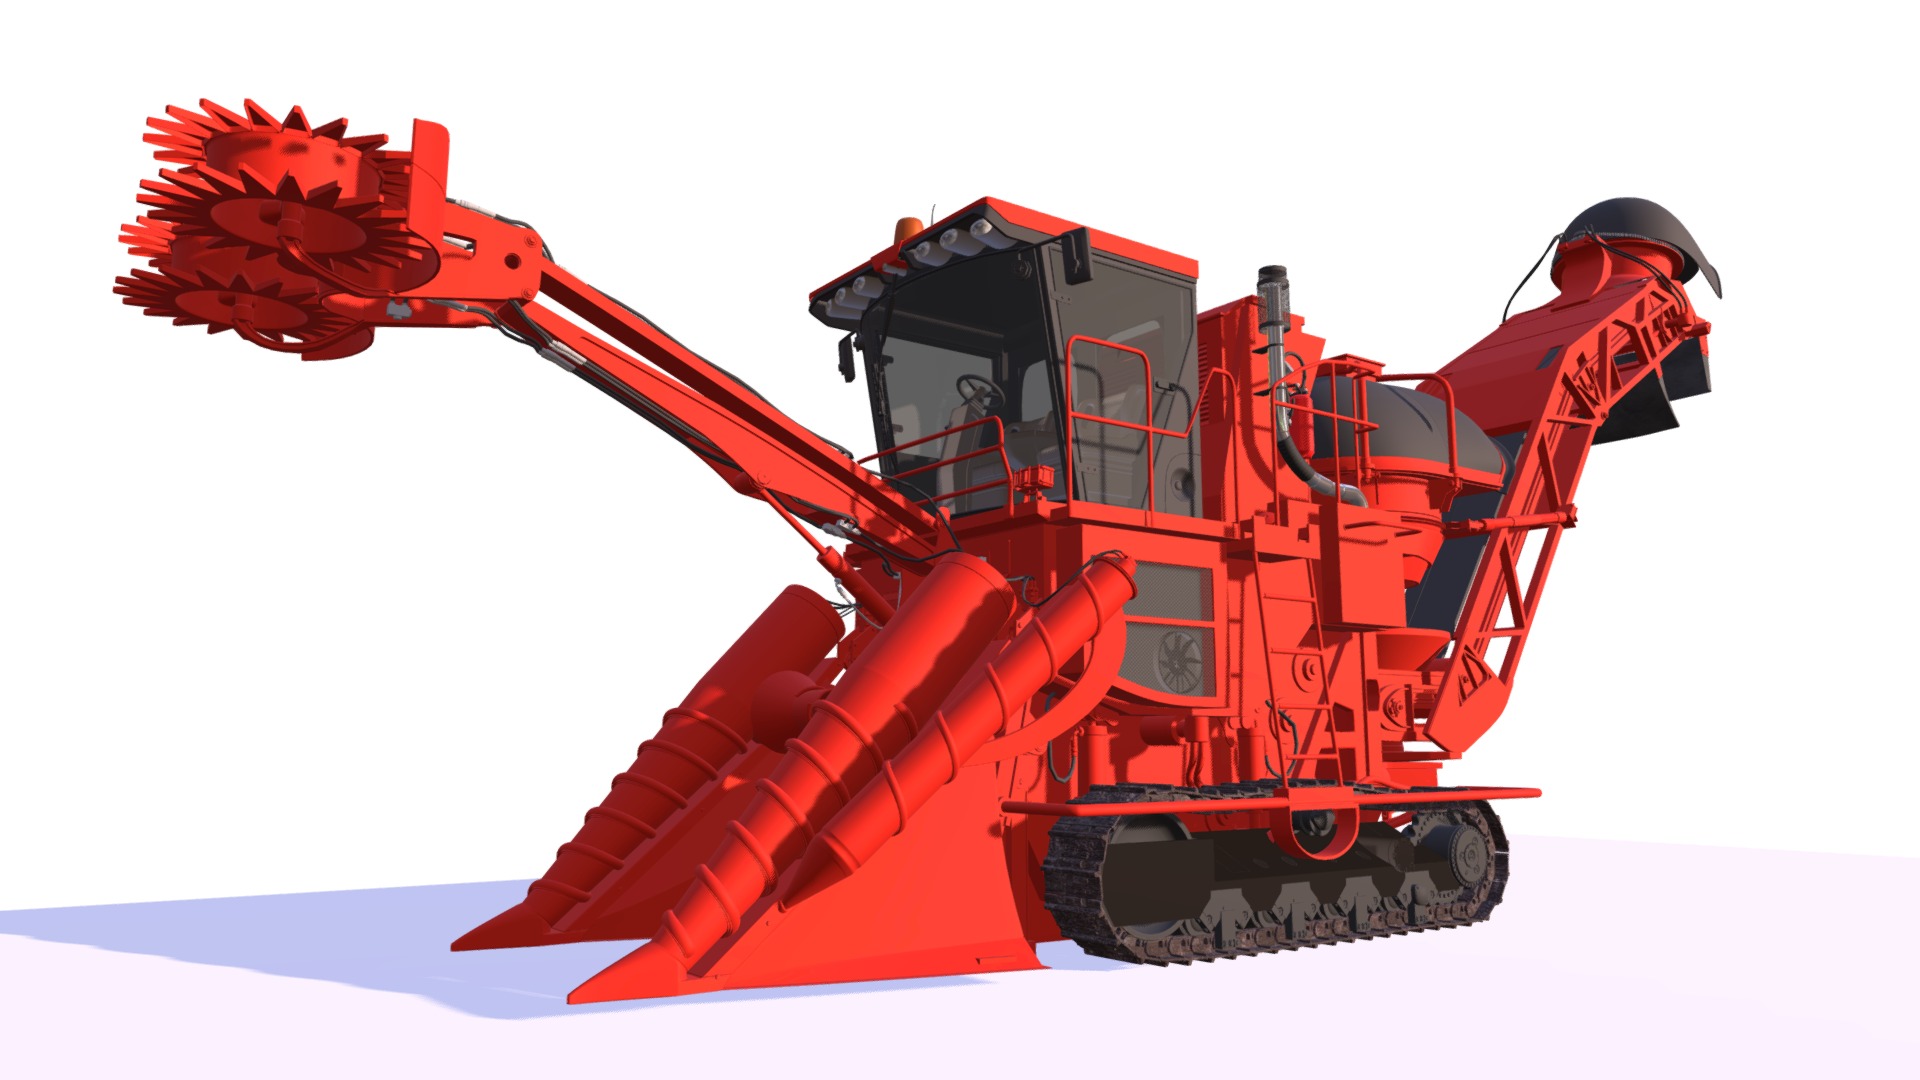 3D model Sugar Cane Harvester - This is a 3D model of the Sugar Cane Harvester. The 3D model is about a red and black construction vehicle.